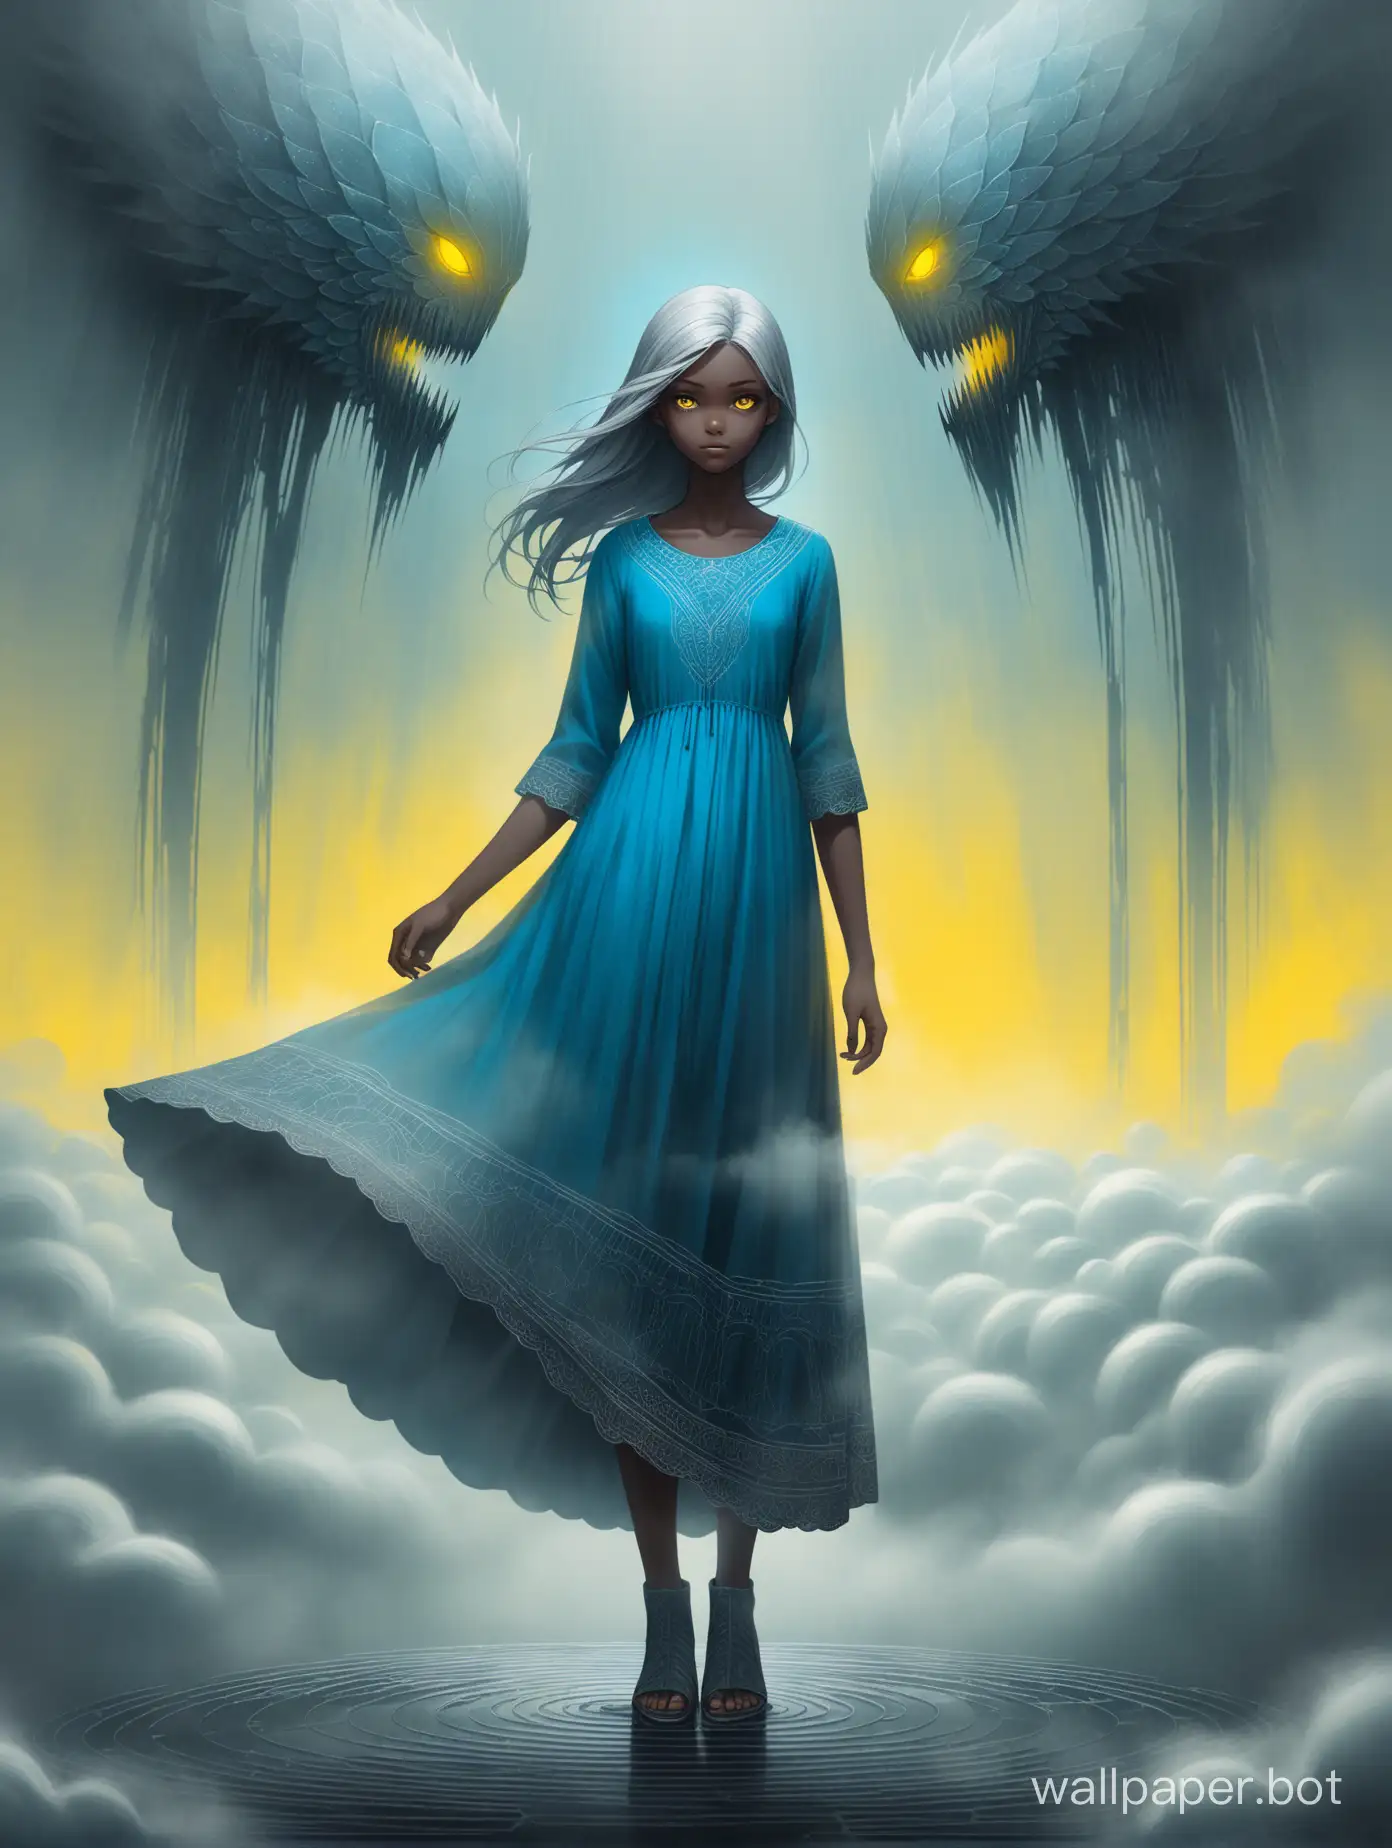 atmosphere, Gabriel Pacheco style, yellow background in a foggy cloud, dark girl 15 years old, big clear blue eyes, gray hair braided, long loose dress with sewing at the bottom, intricate details, octane, bright 3D illustration, clear, bold brush strokes, height - 3/4